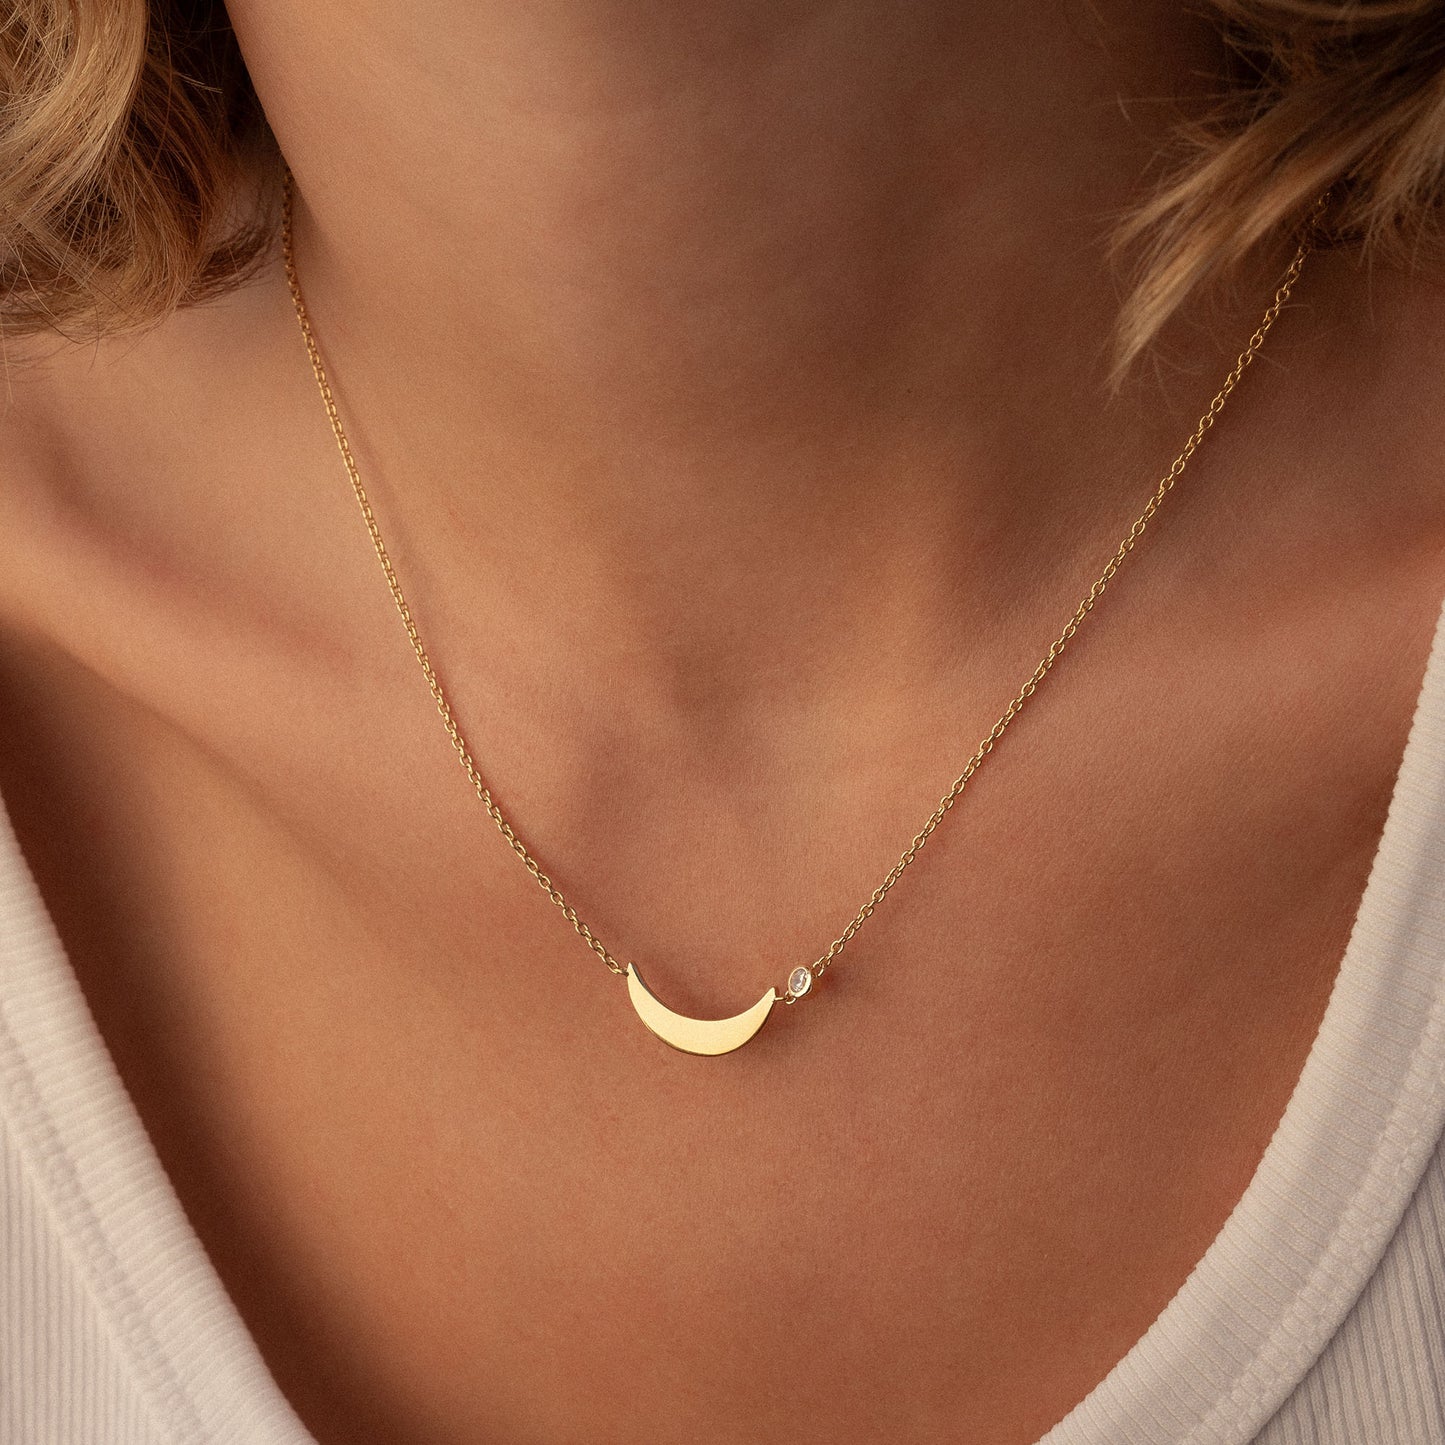 Luna 925 sterling silver gold plated necklace with white zirconia stone